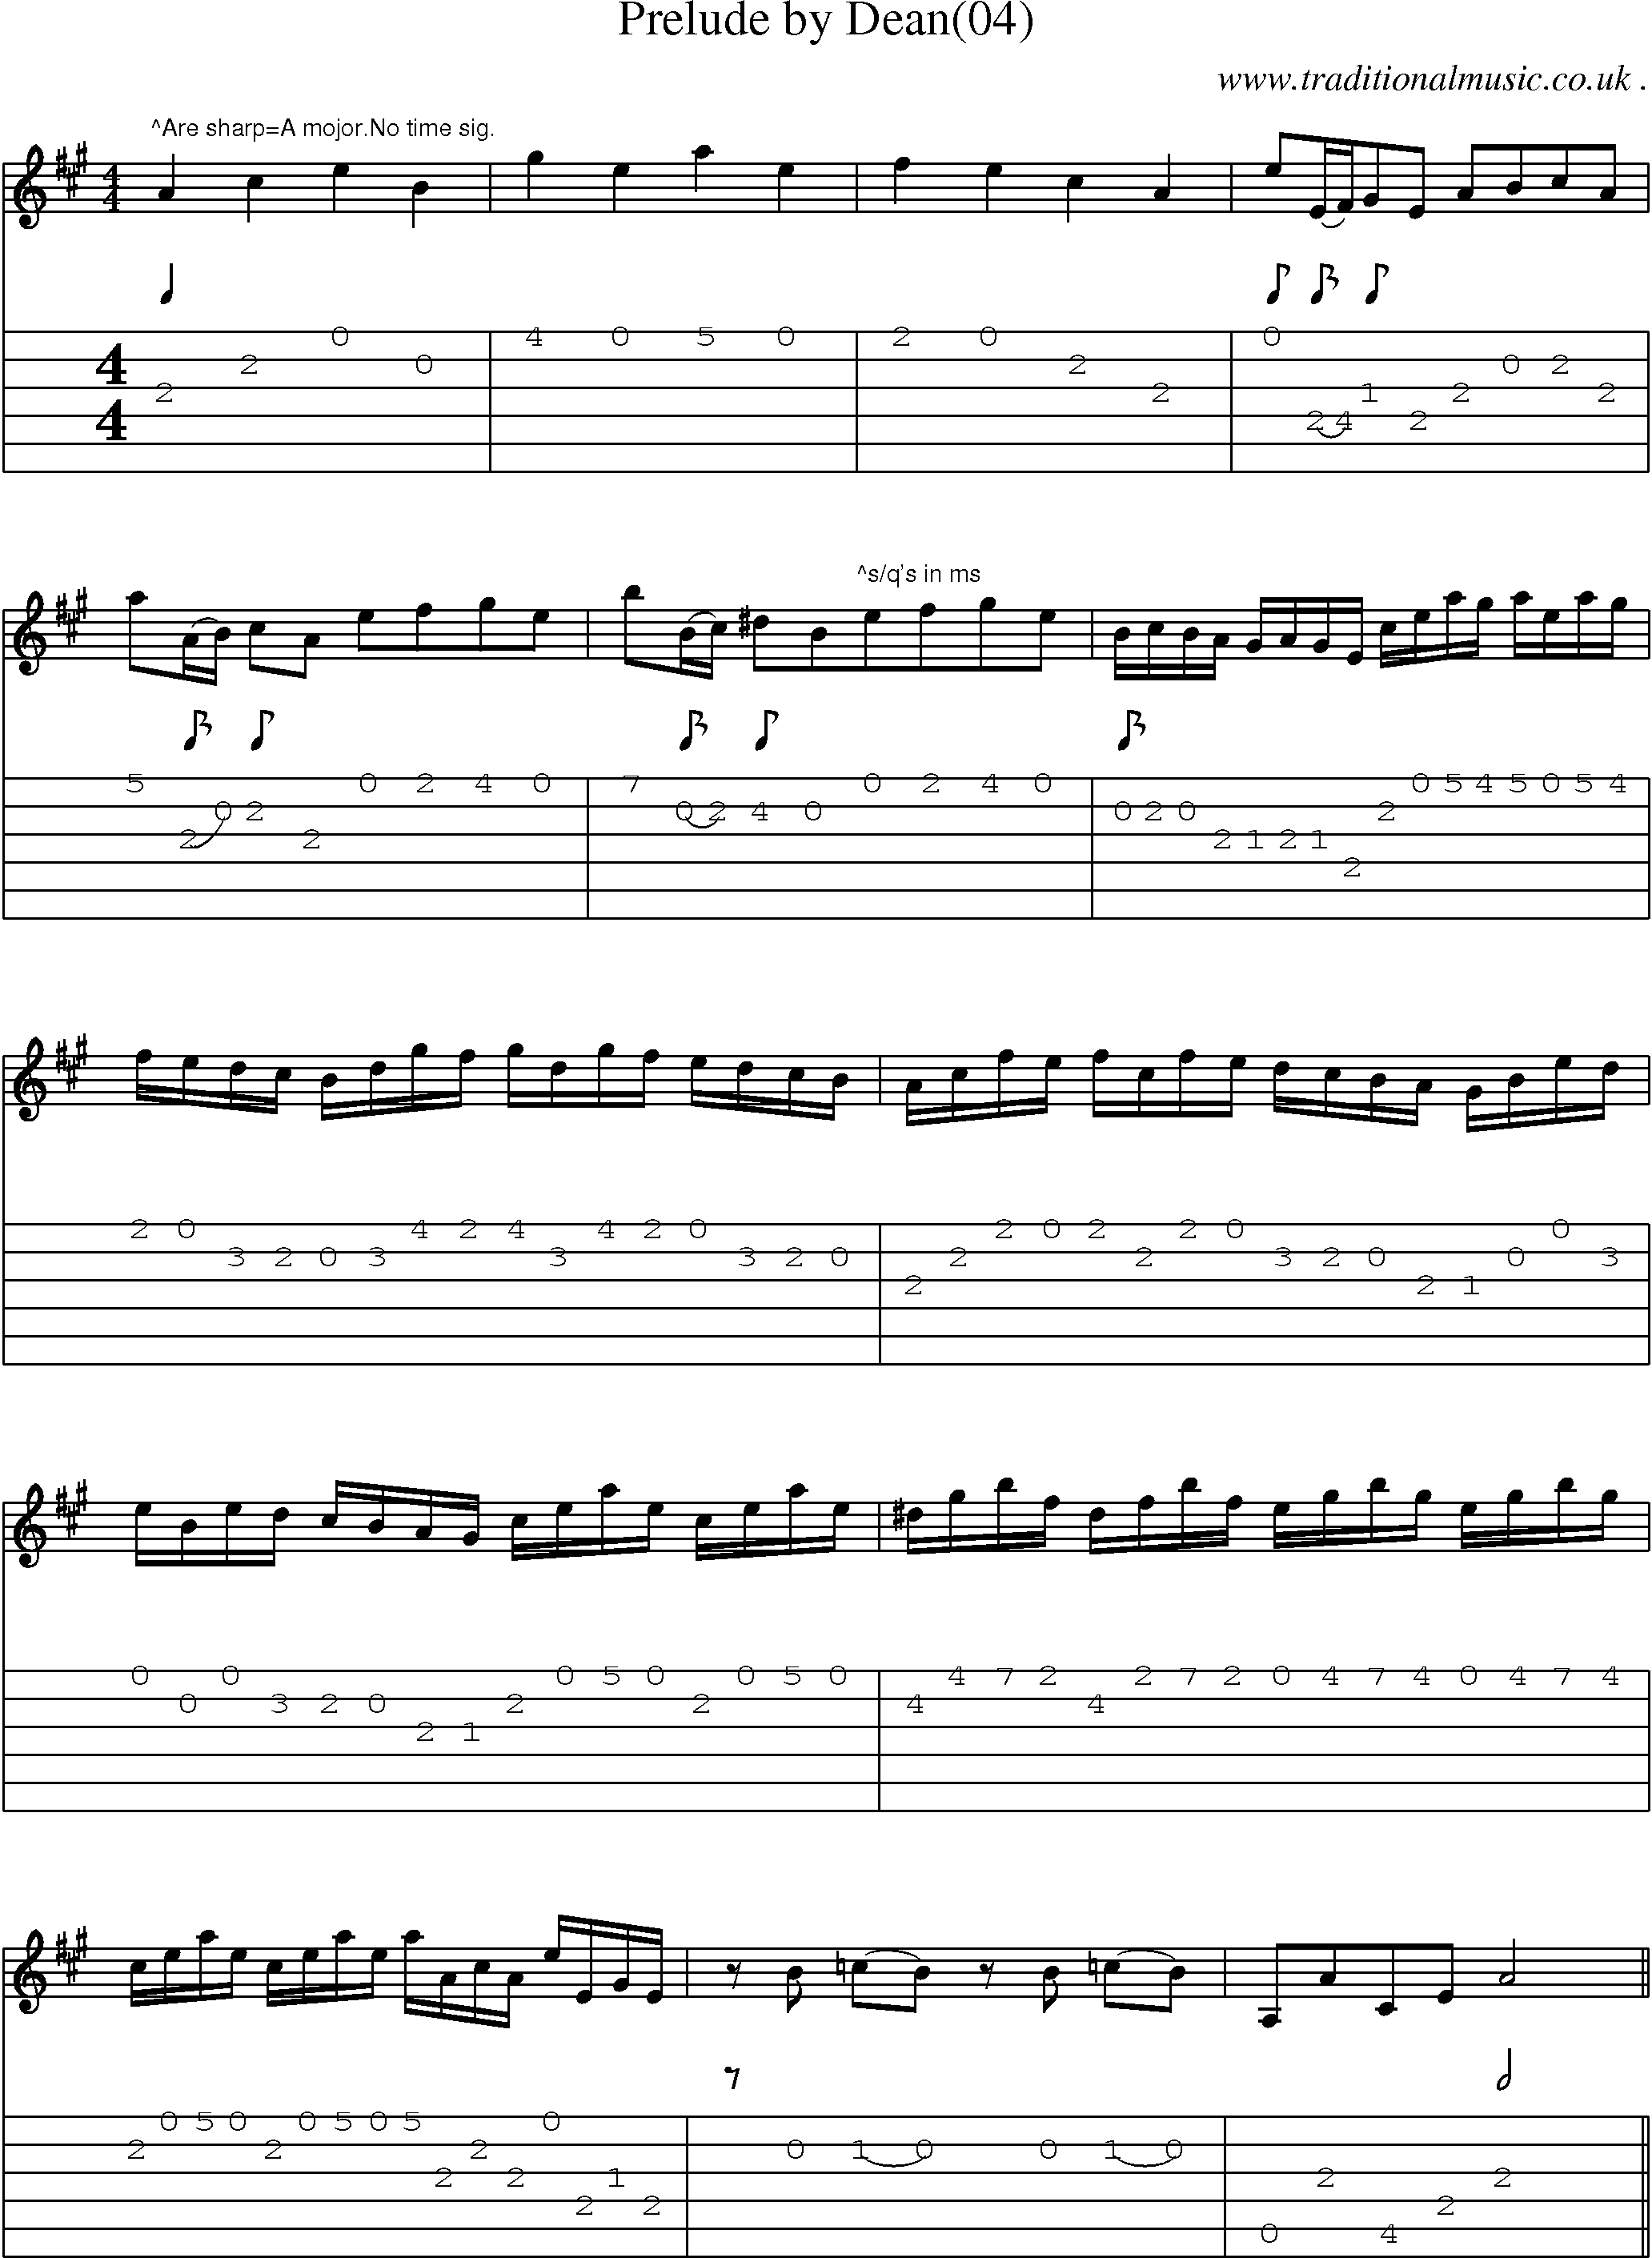 Sheet-Music and Guitar Tabs for Prelude By Dean(04)